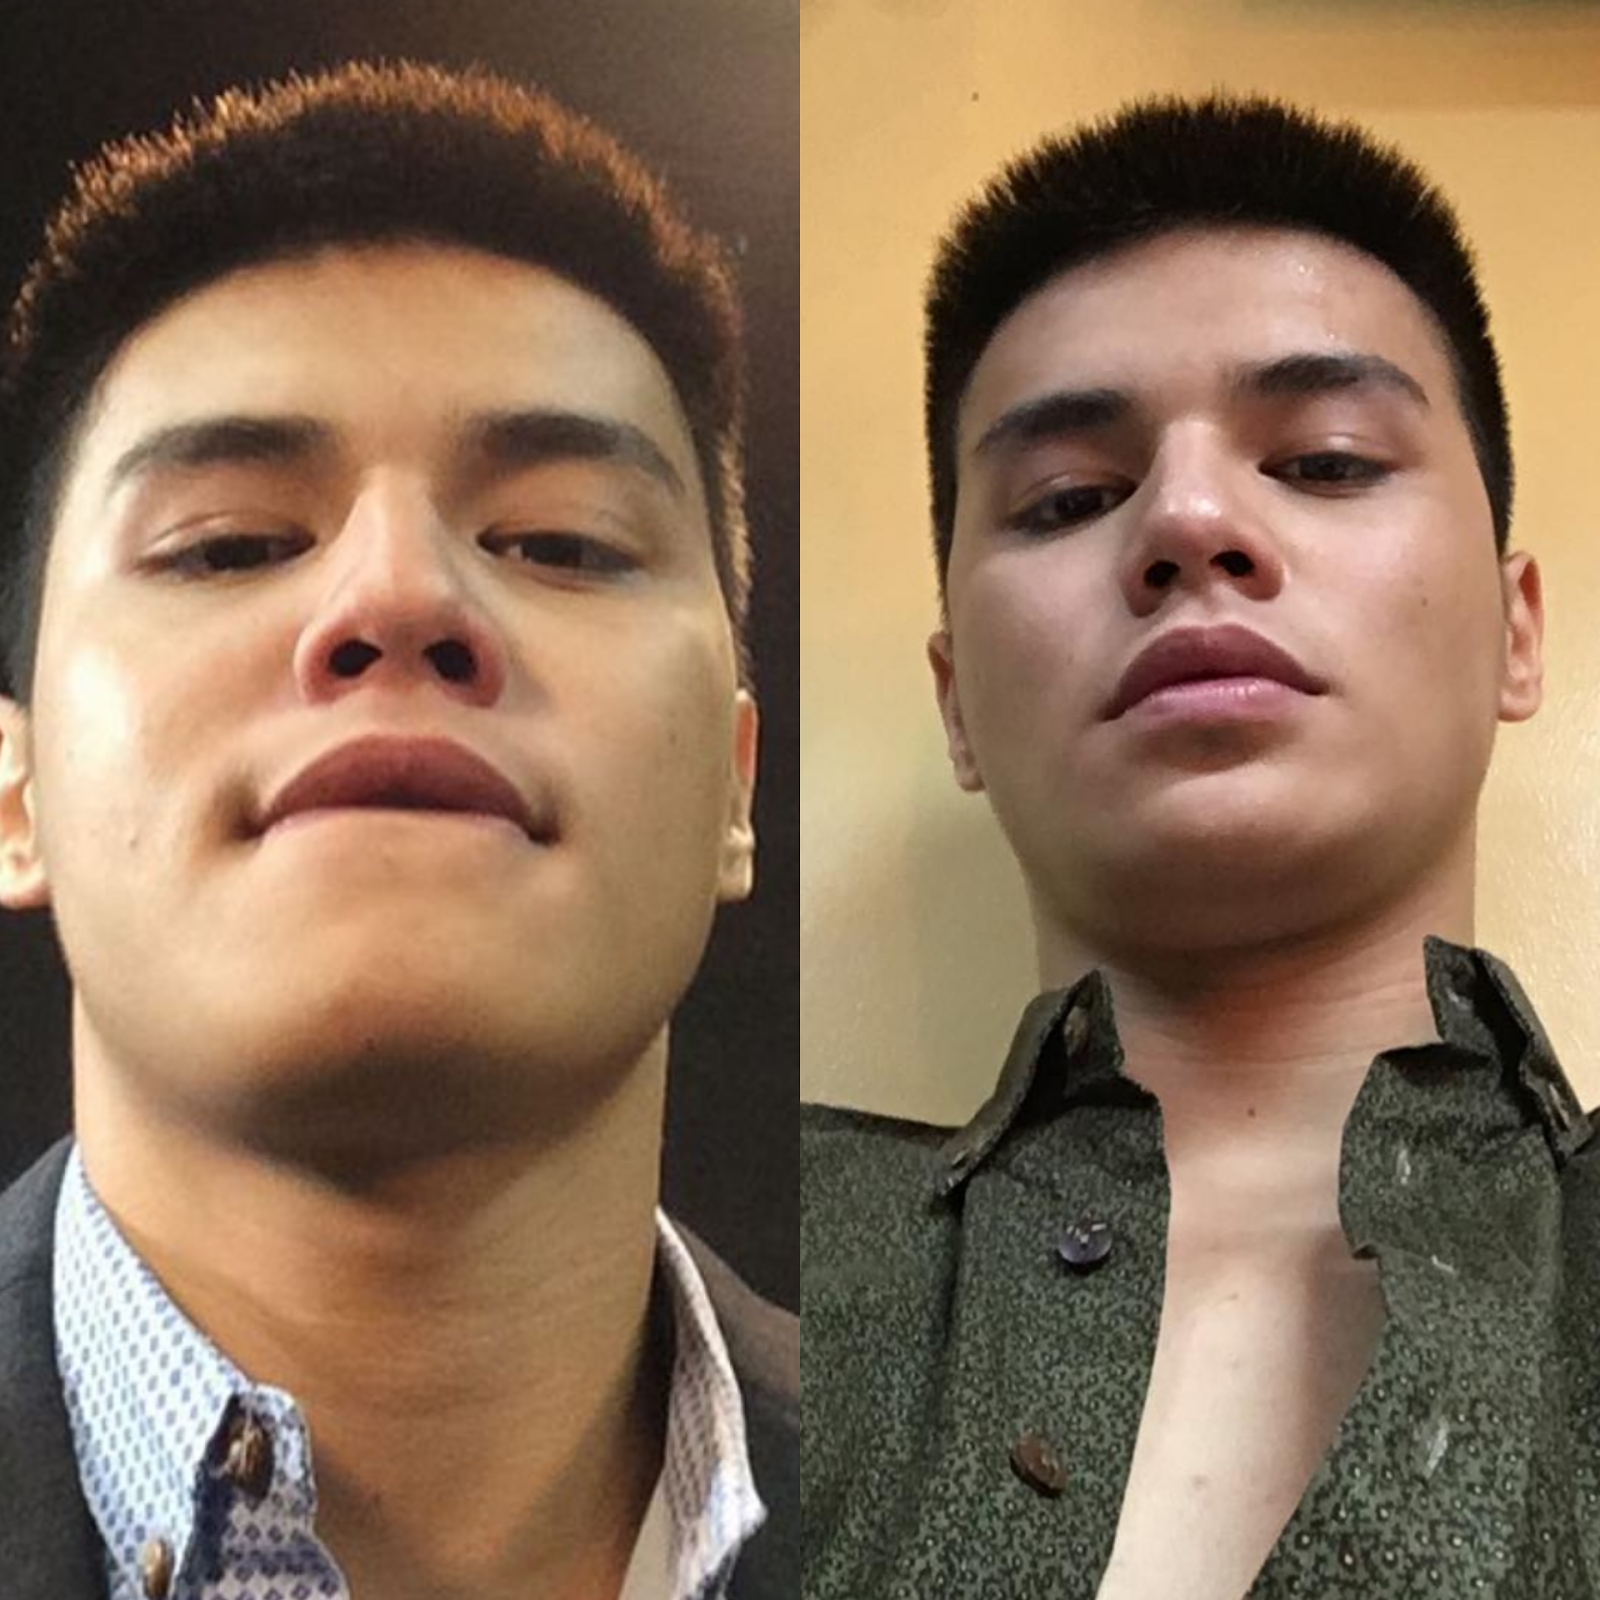 Ronnie Alonte Scandal ♥ronnie Alonte Speaks Up On His Alleged Photo